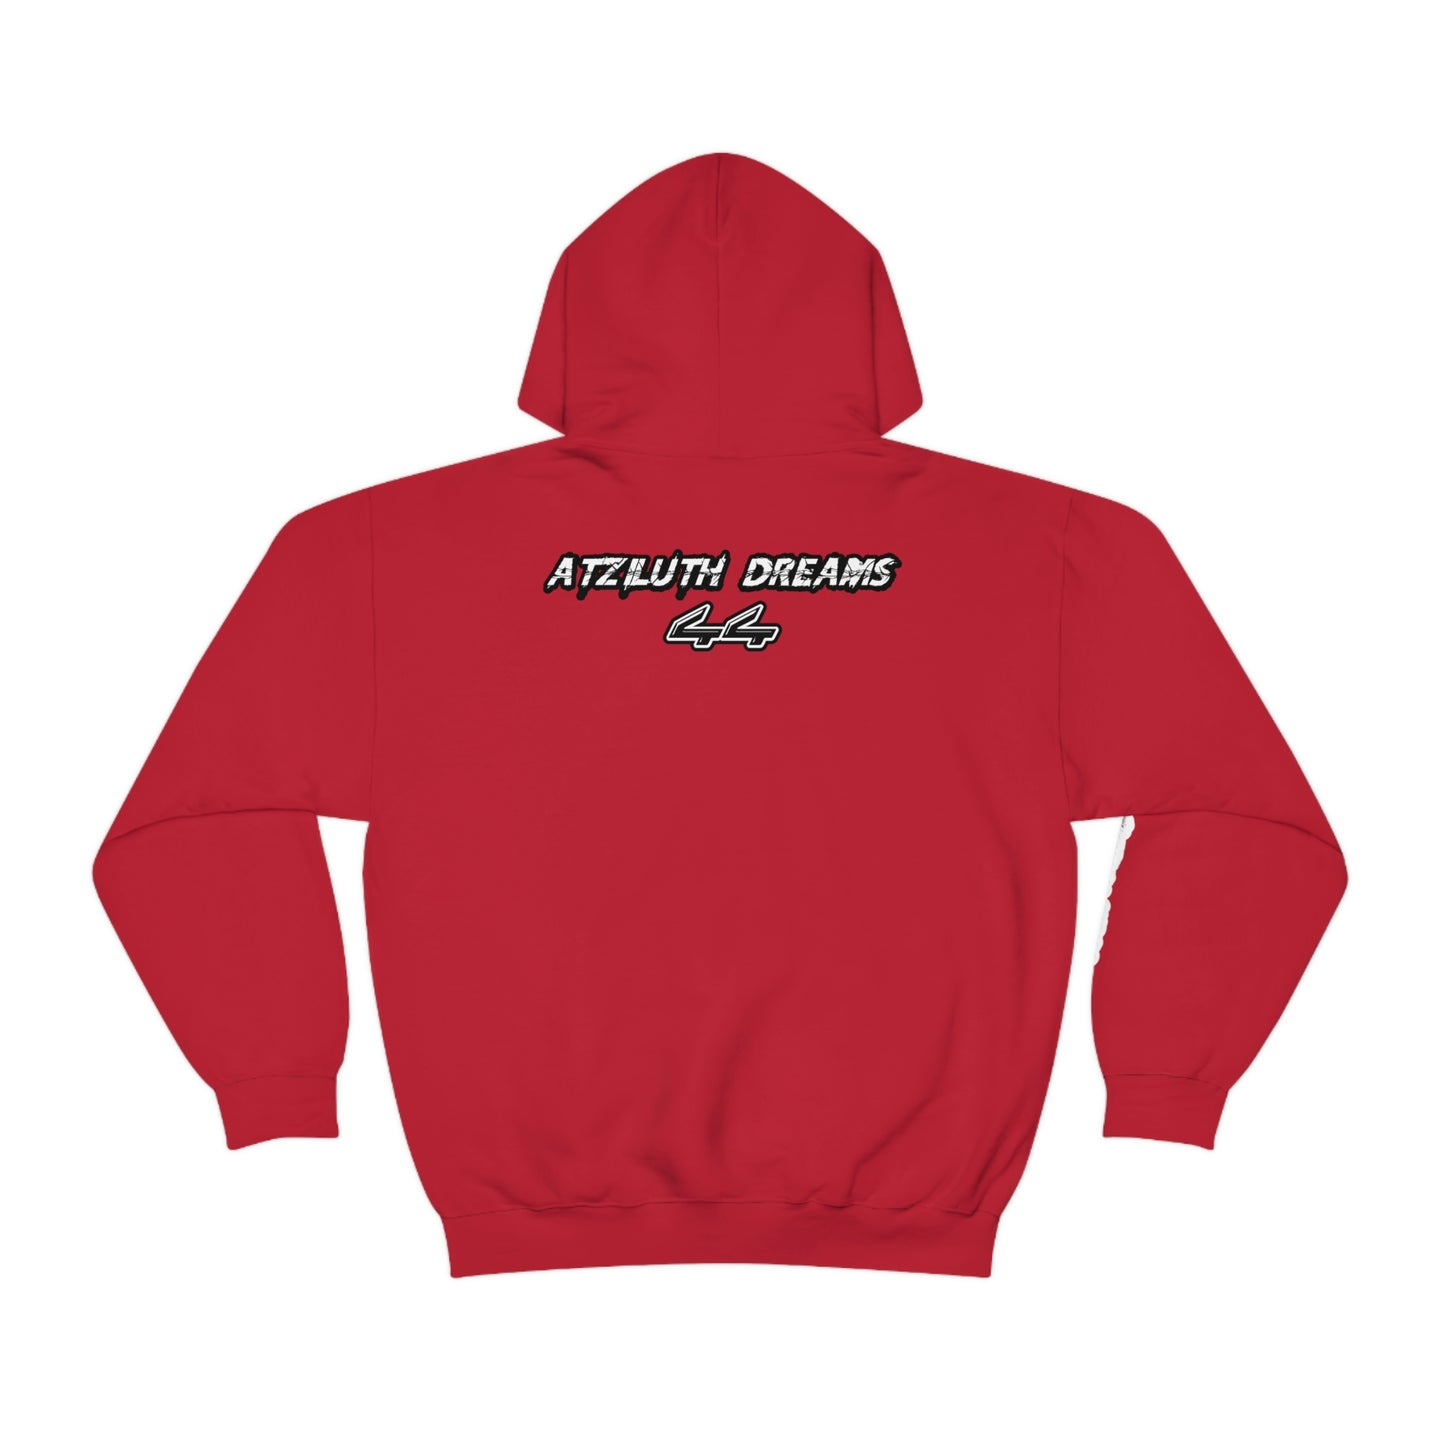 Atziluth Gallery " The Trap is Ded " Hoodie